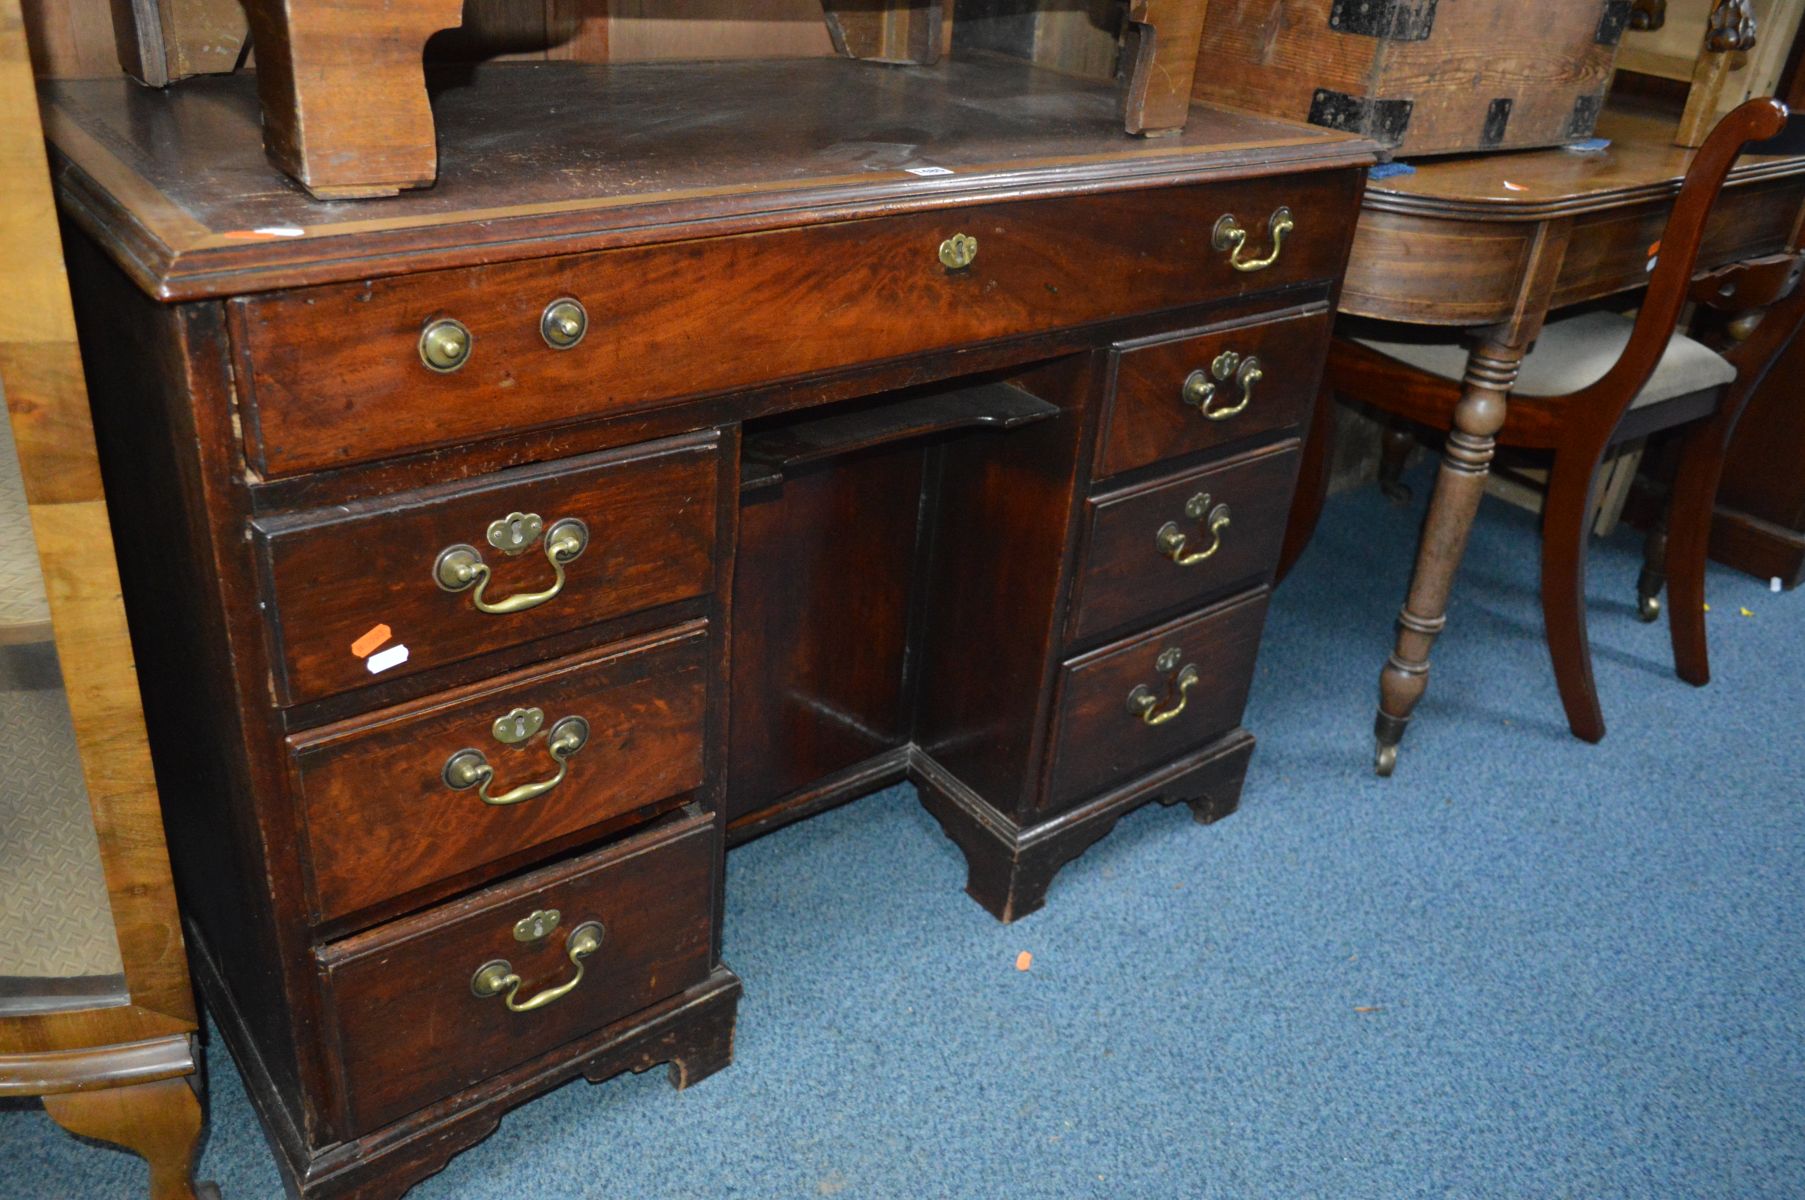 AN EARLY 20TH CENTURY GEORGIAN STYLE MAHOGANY KNEE HOLE DESK with a brown leather insert, one long